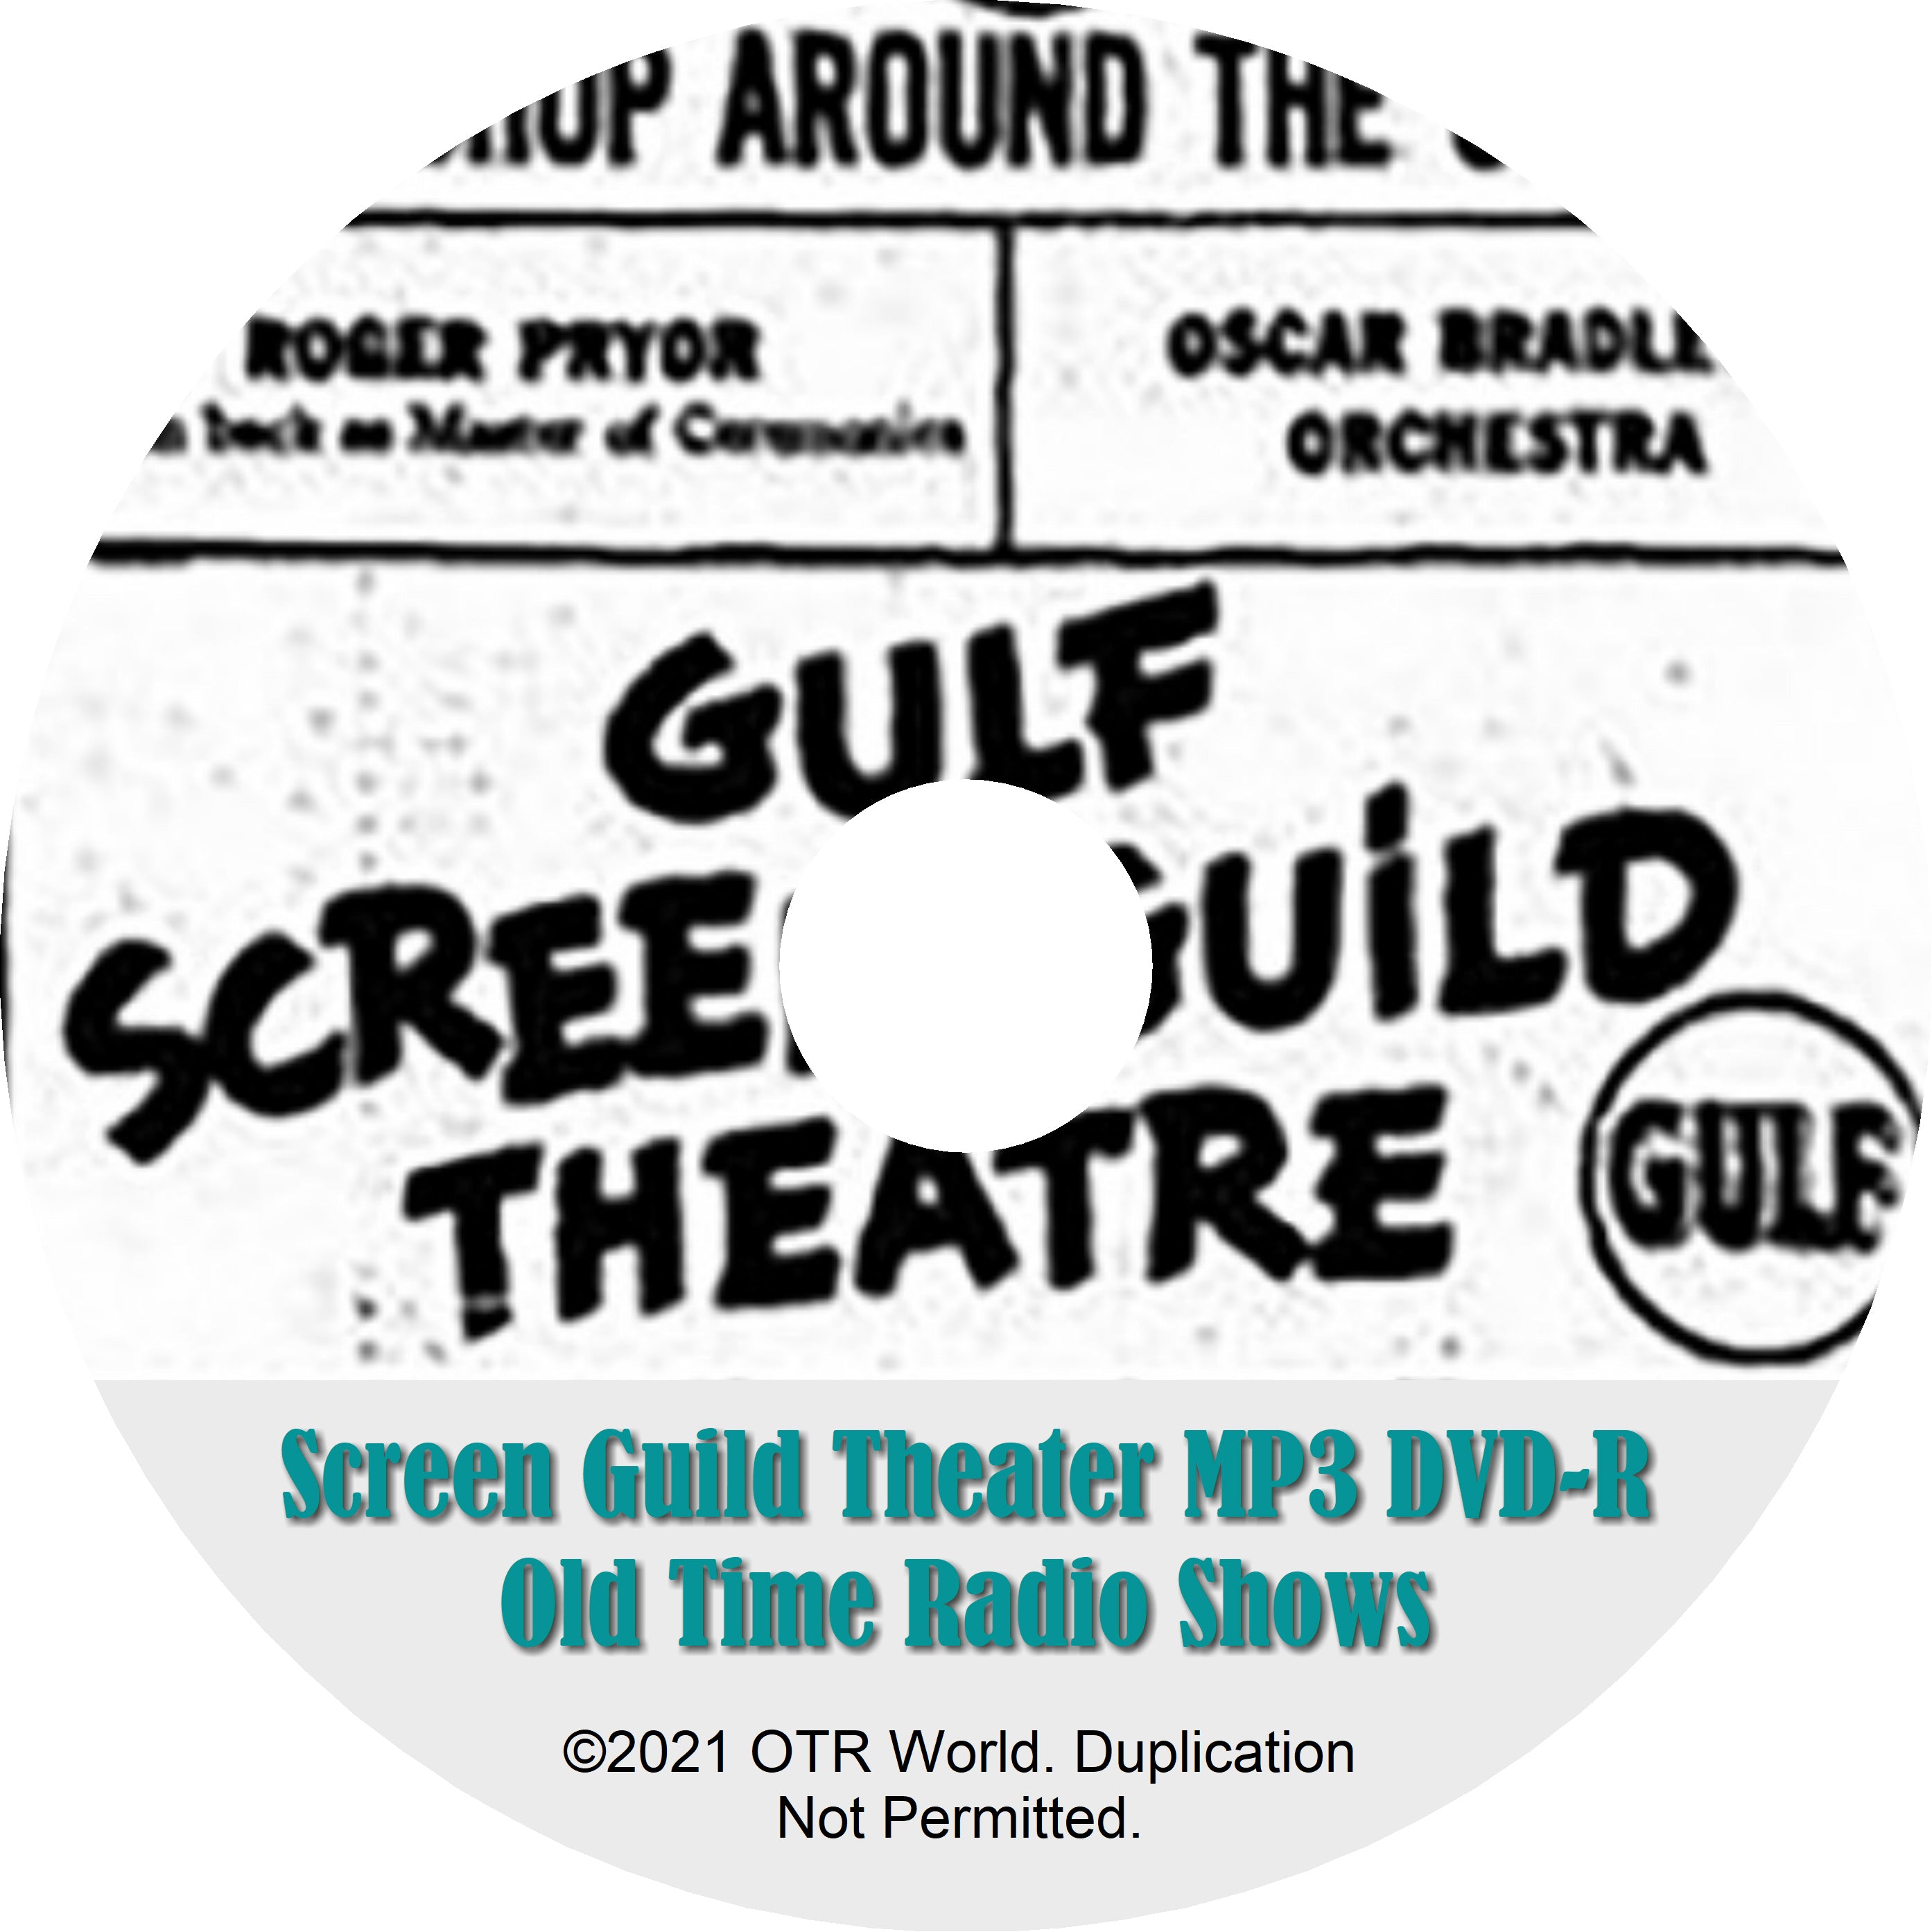 Screen Guild Theater OTR Old Time Radio Shows MP3 On DVD-R 183 Episodes